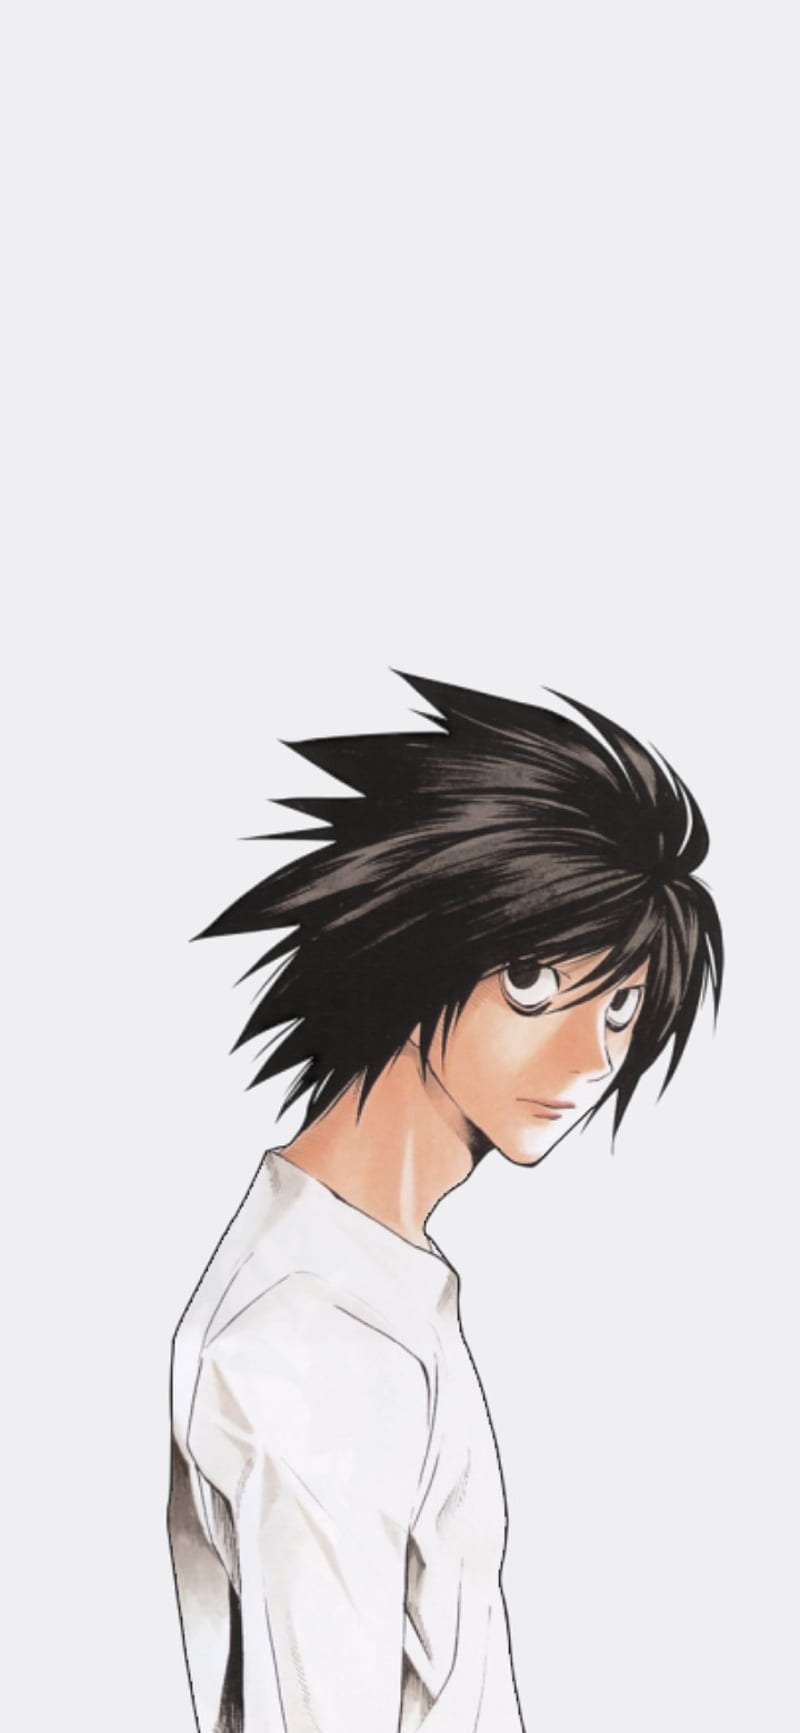 121945 Death Note Lawliet L Anime  Android  iPhone HD Wallpaper  Background Download HD Wallpapers Desktop Background  Android  iPhone  1080p 4k 1080x675 2023